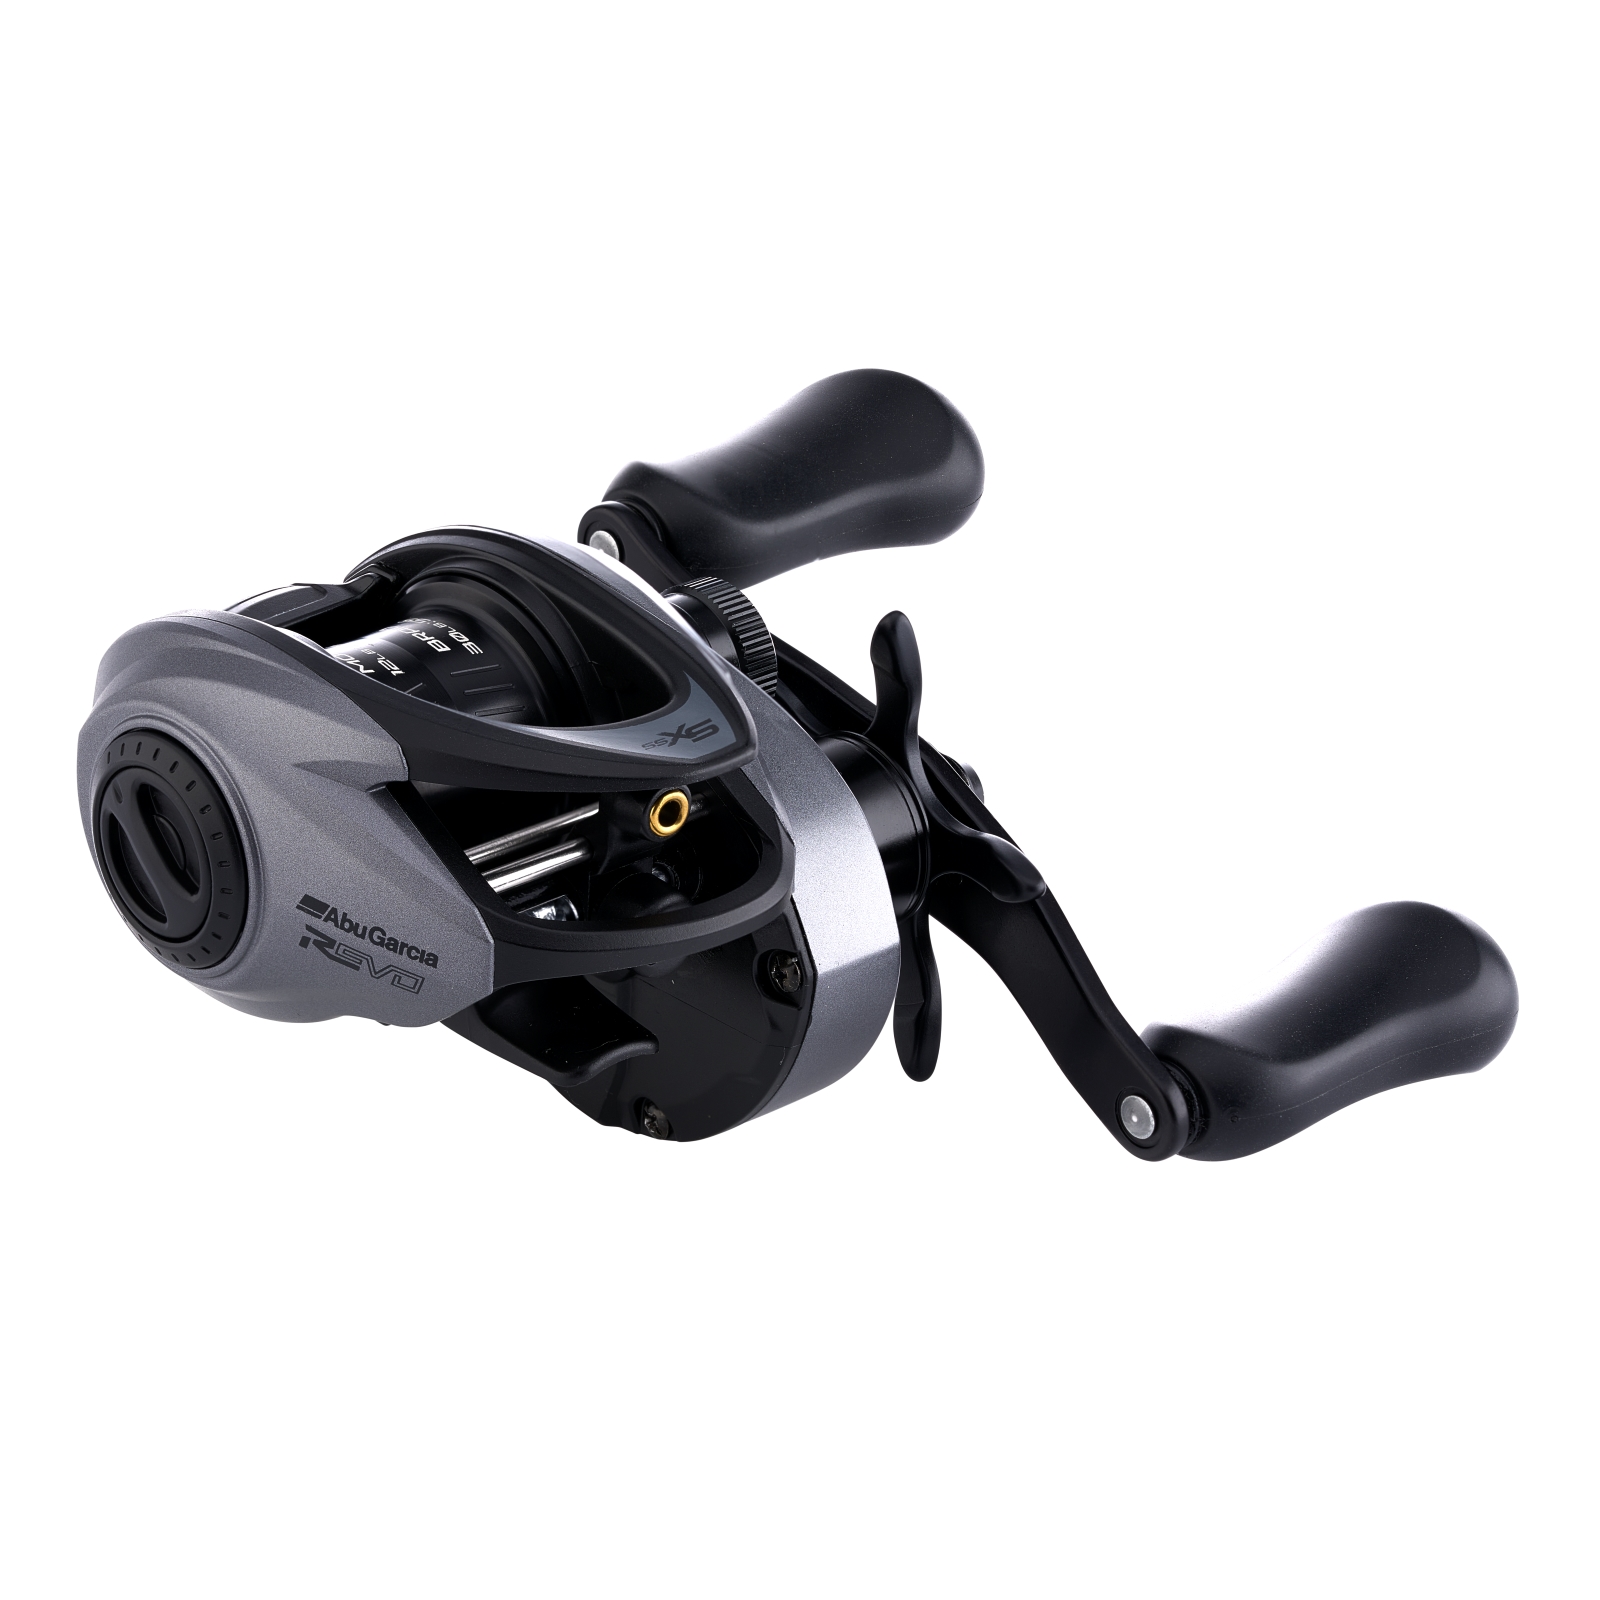 New from Abu Garcia: The Revo SX-SS Low Profile Casting Reel